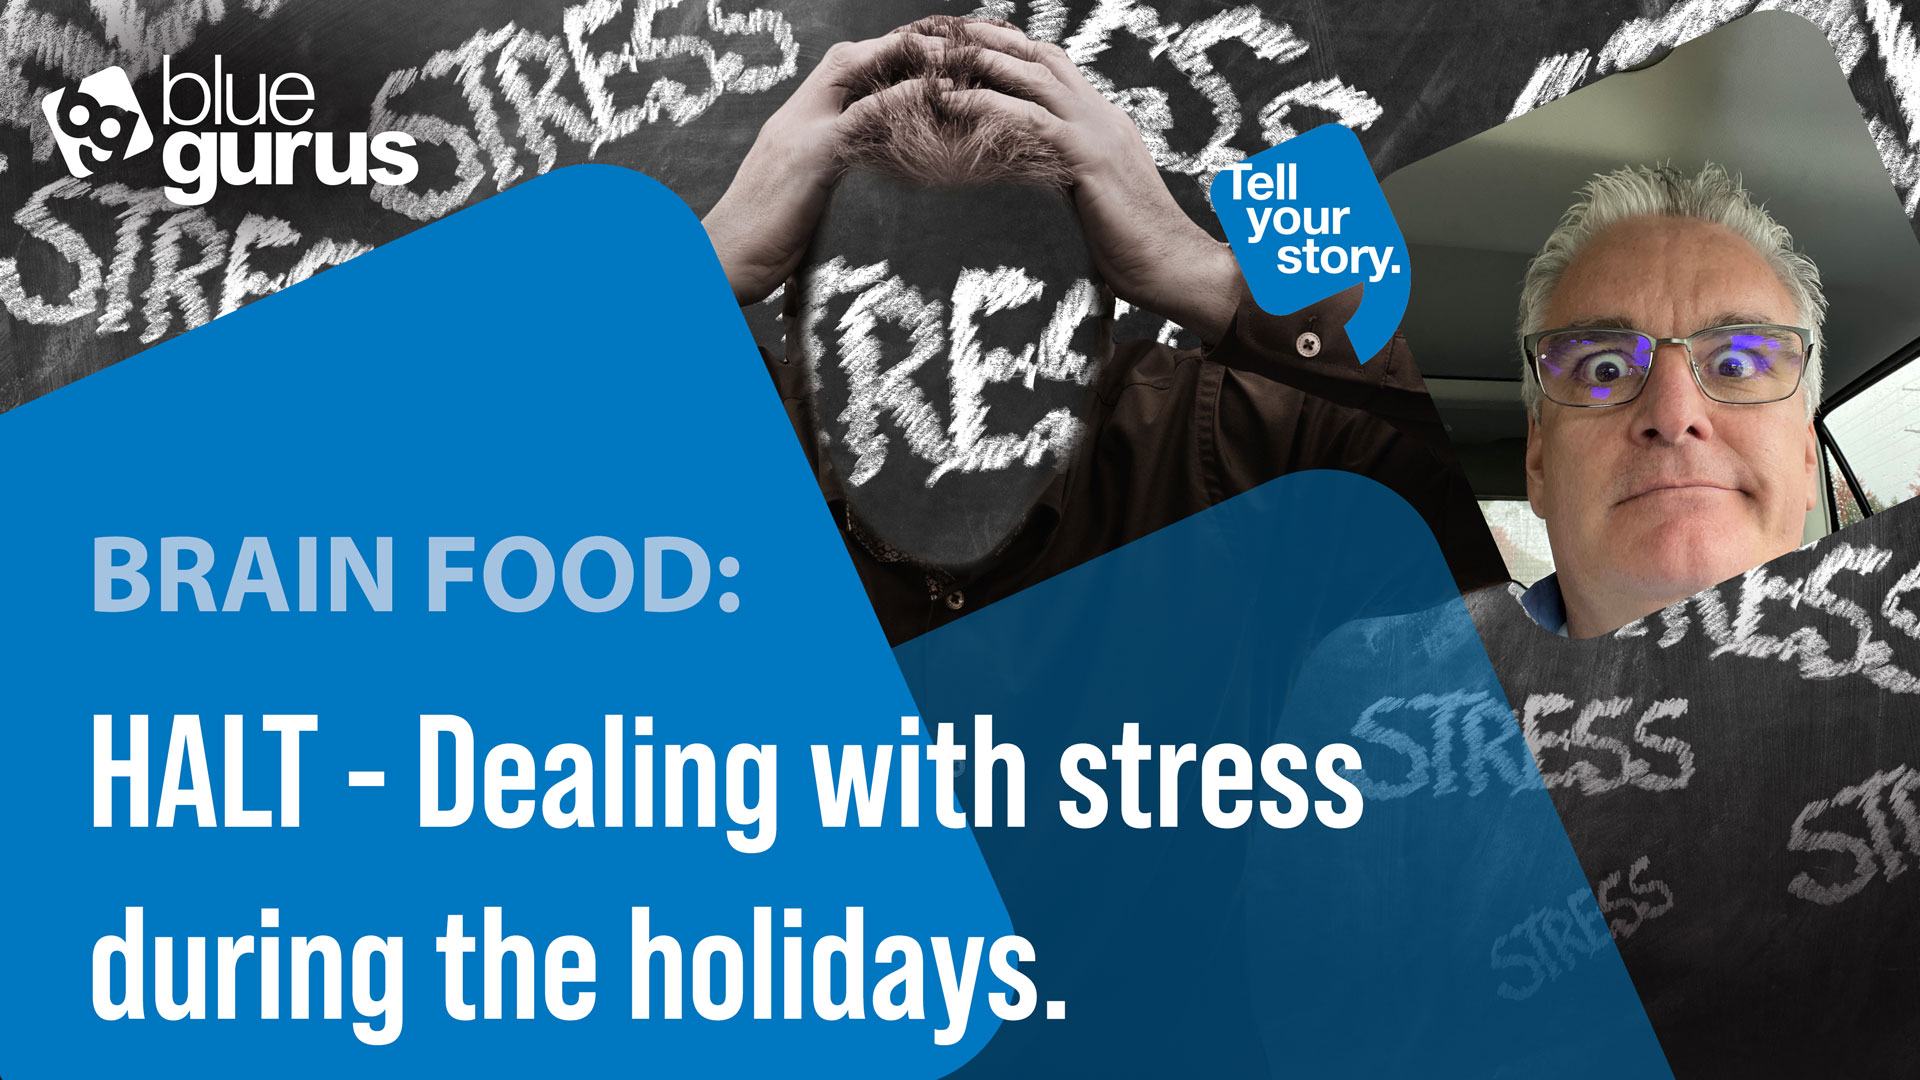 HALT - Dealing with stress during the holidays.